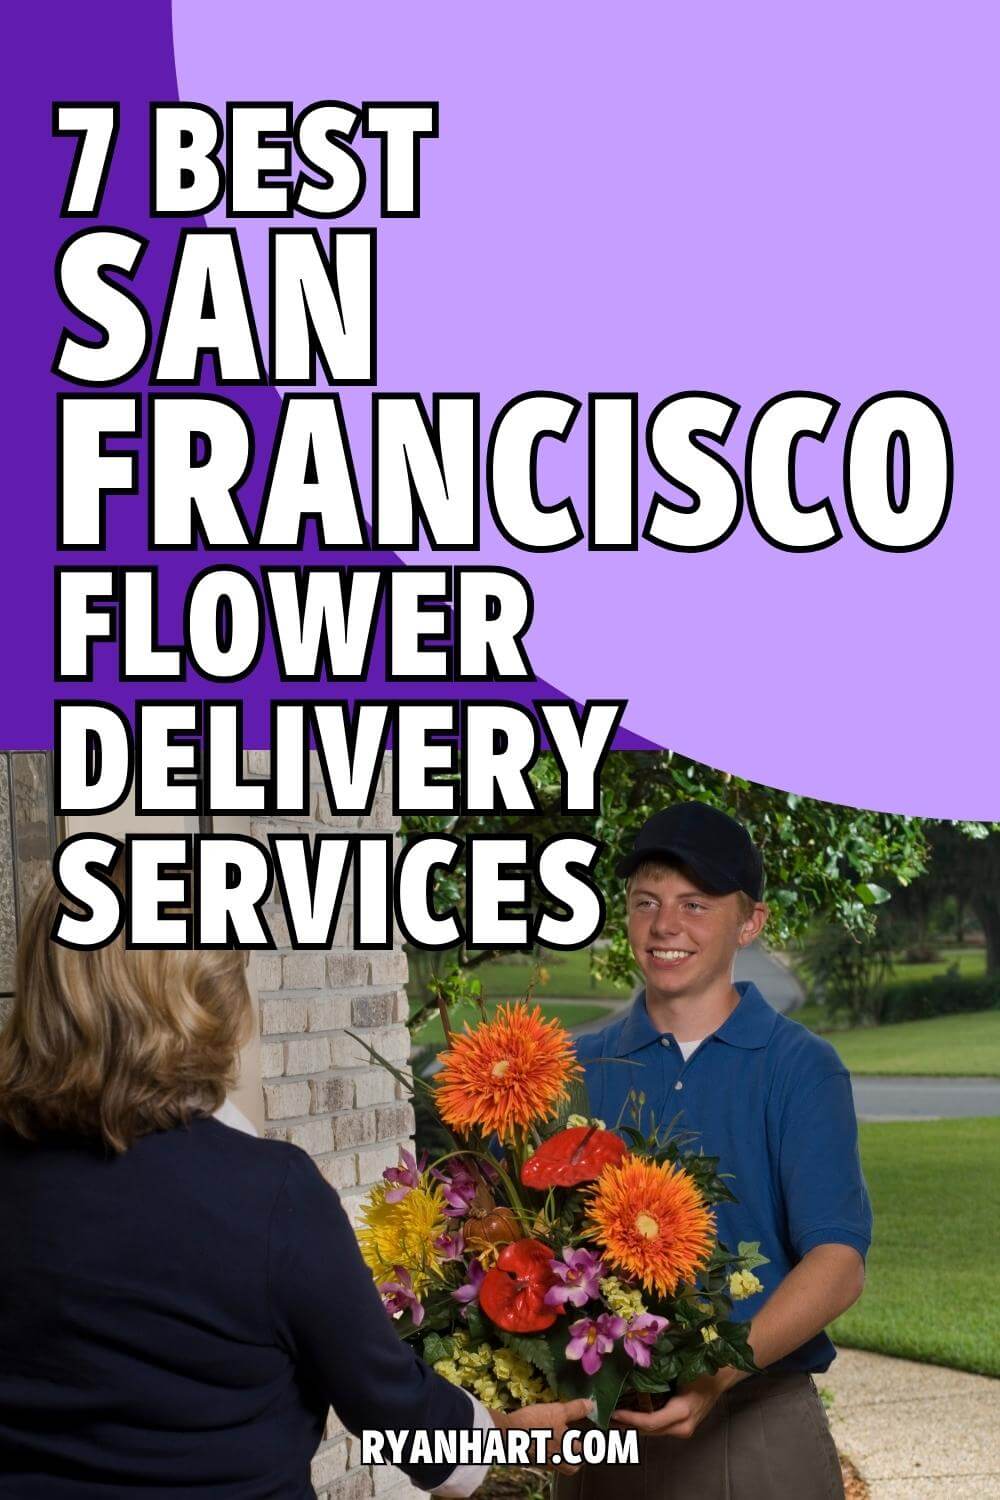 Flower delivery man